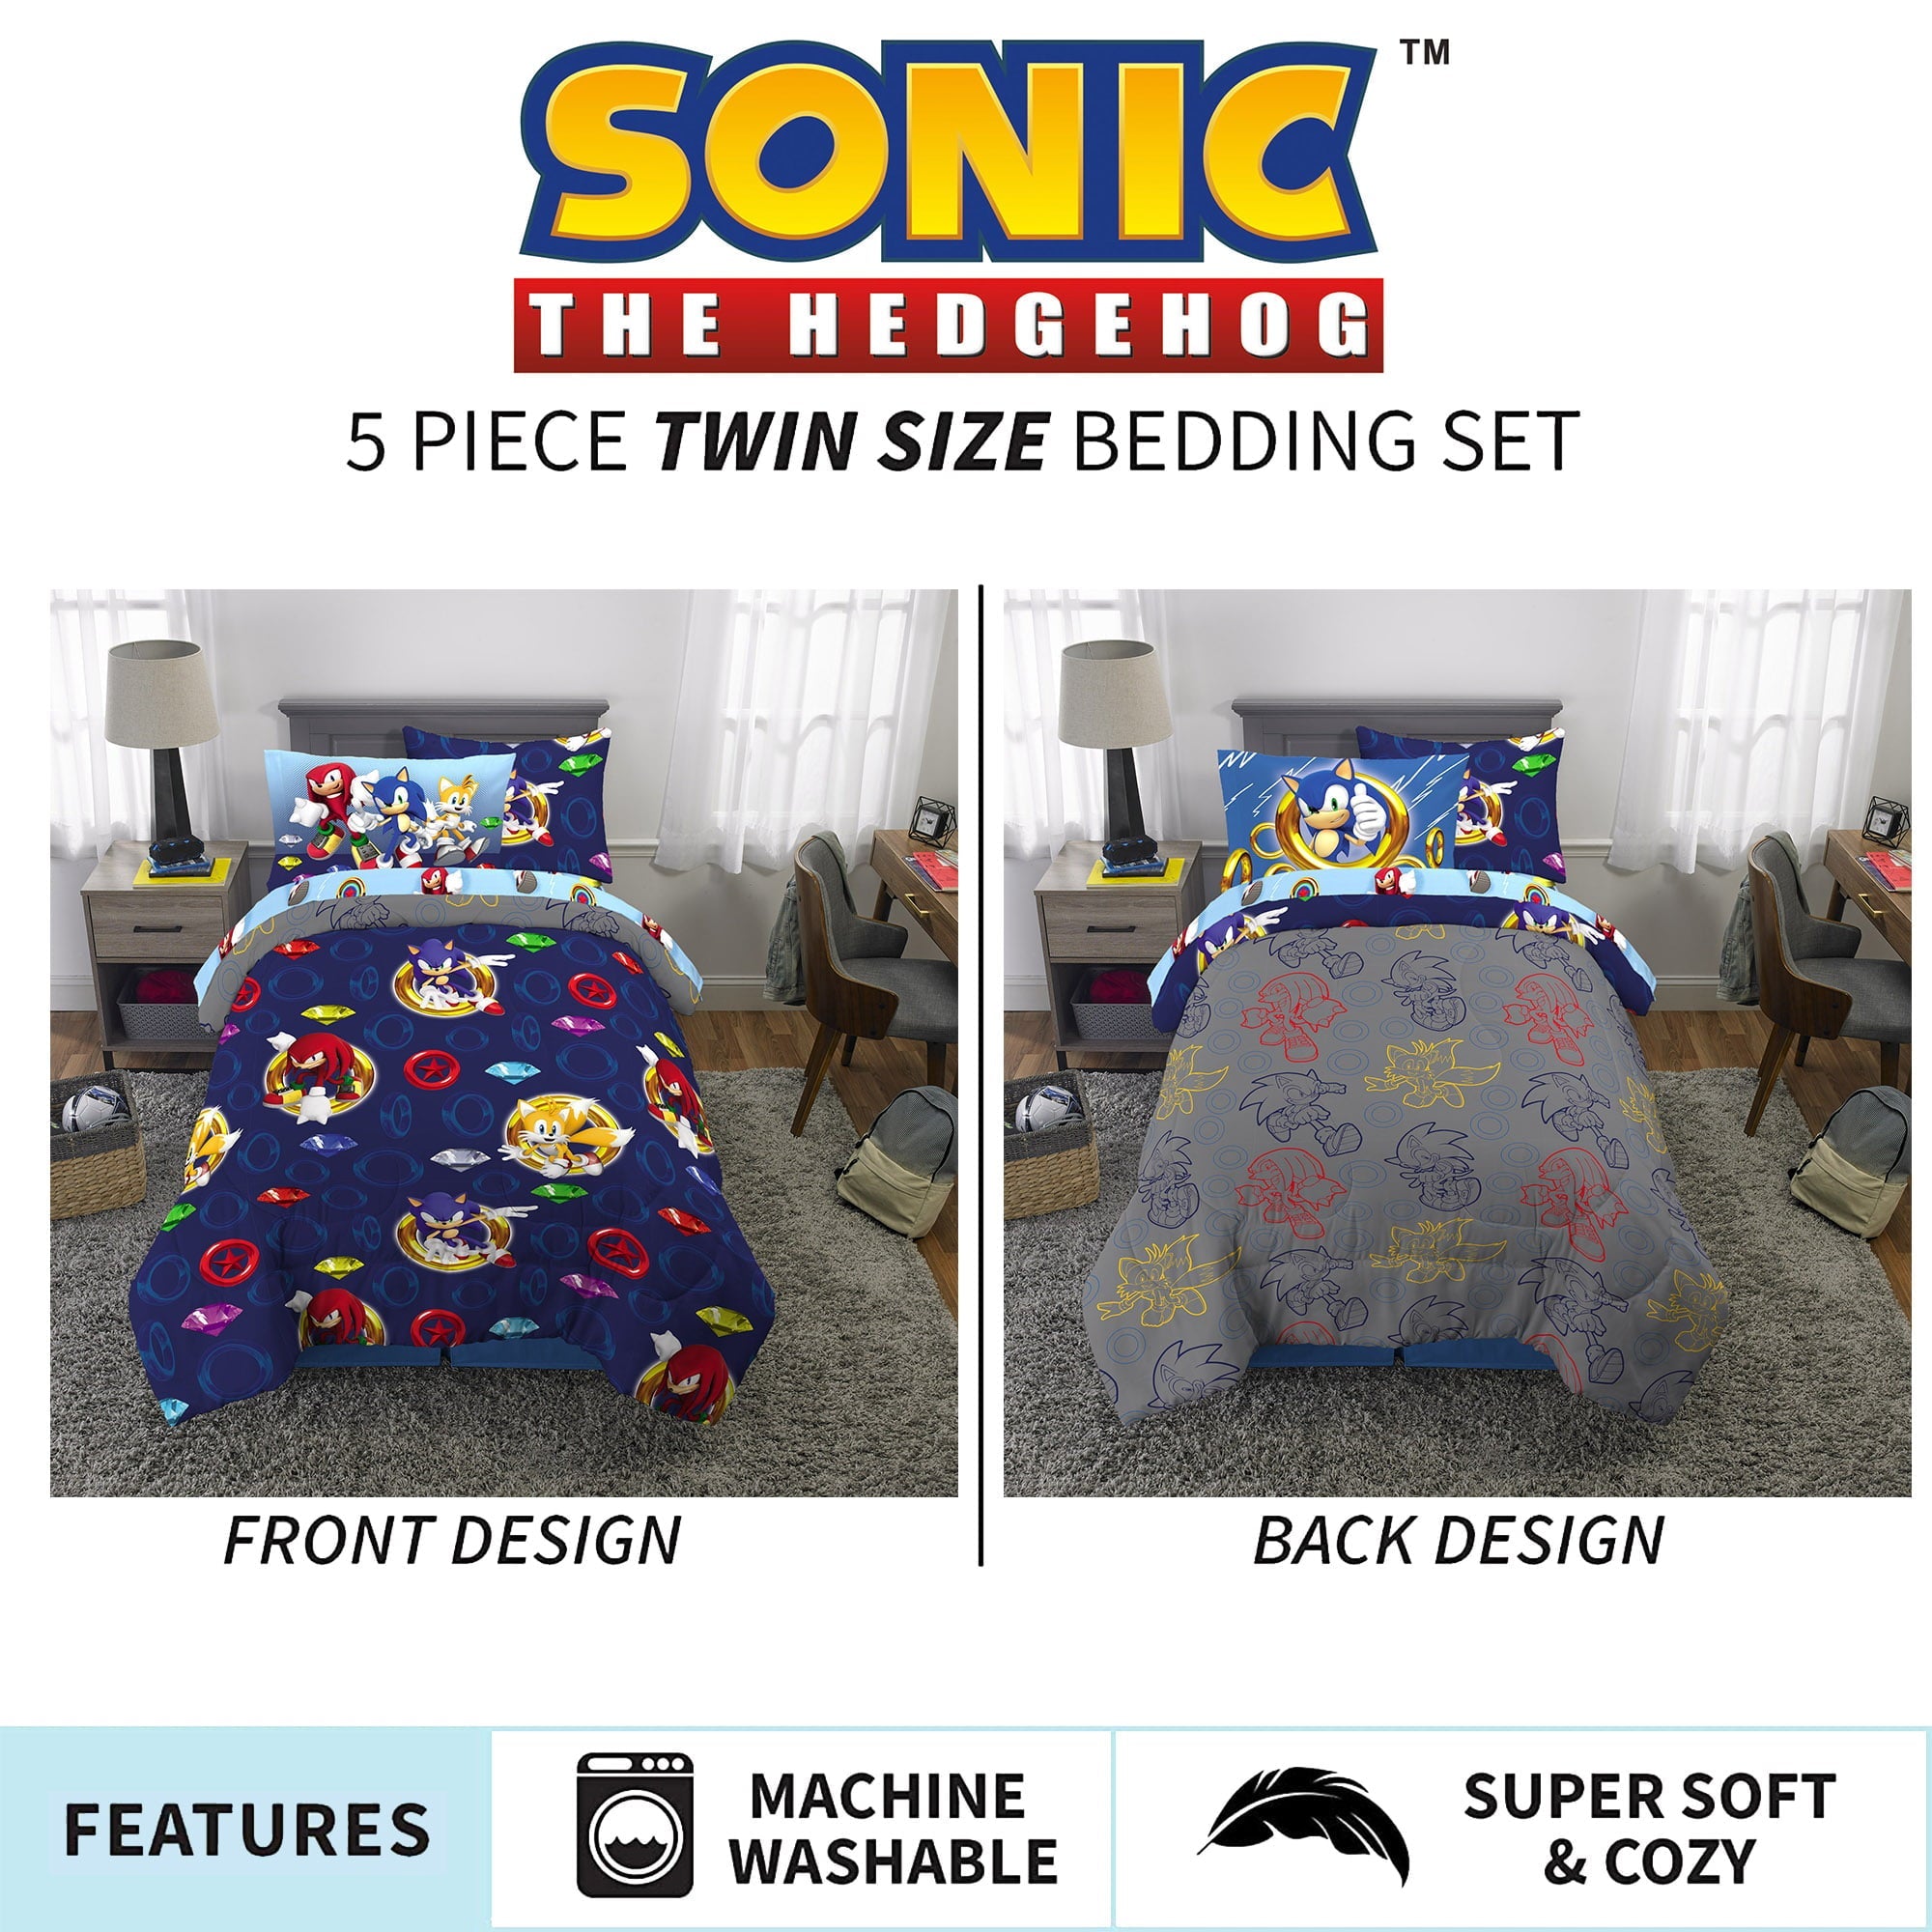 Sonic the Hedgehog Kids Twin Bed in a Bag, Gaming Bedding, Comforter Sheets and Sham, Blue